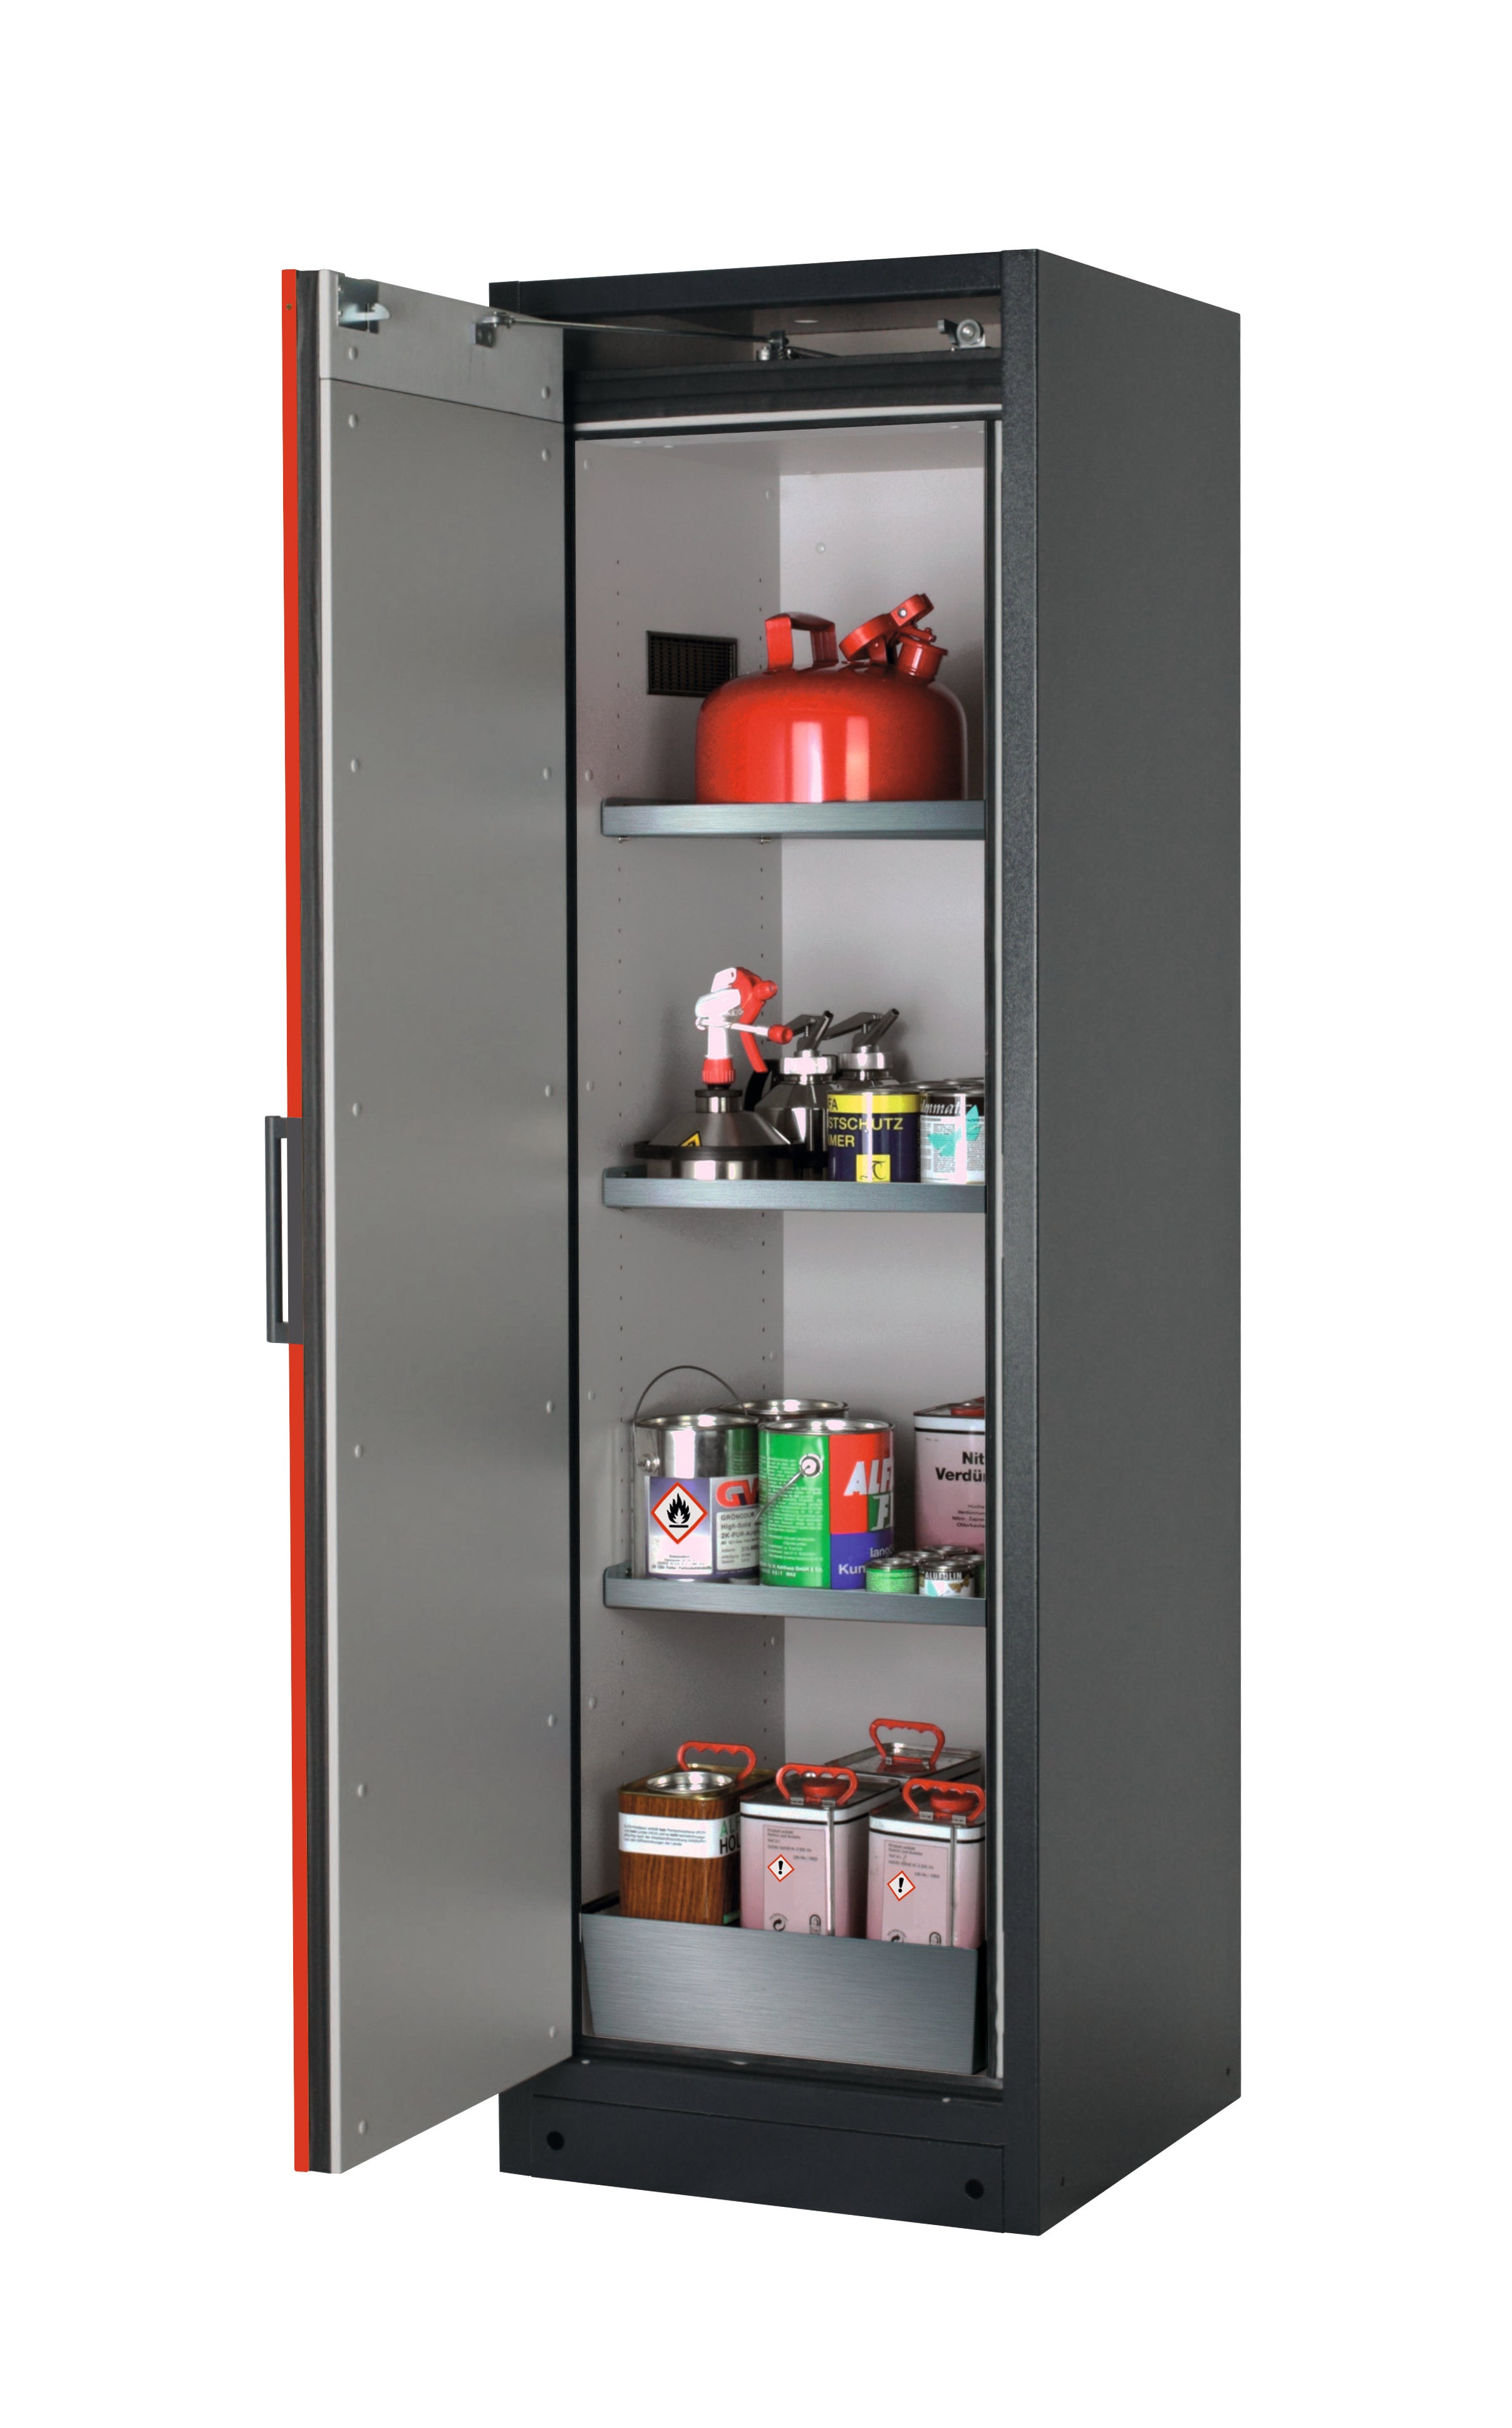 Type 90 safety storage cabinet Q-CLASSIC-90 model Q90.195.060 in traffic red RAL 3020 with 3x shelf standard (stainless steel 1.4301),